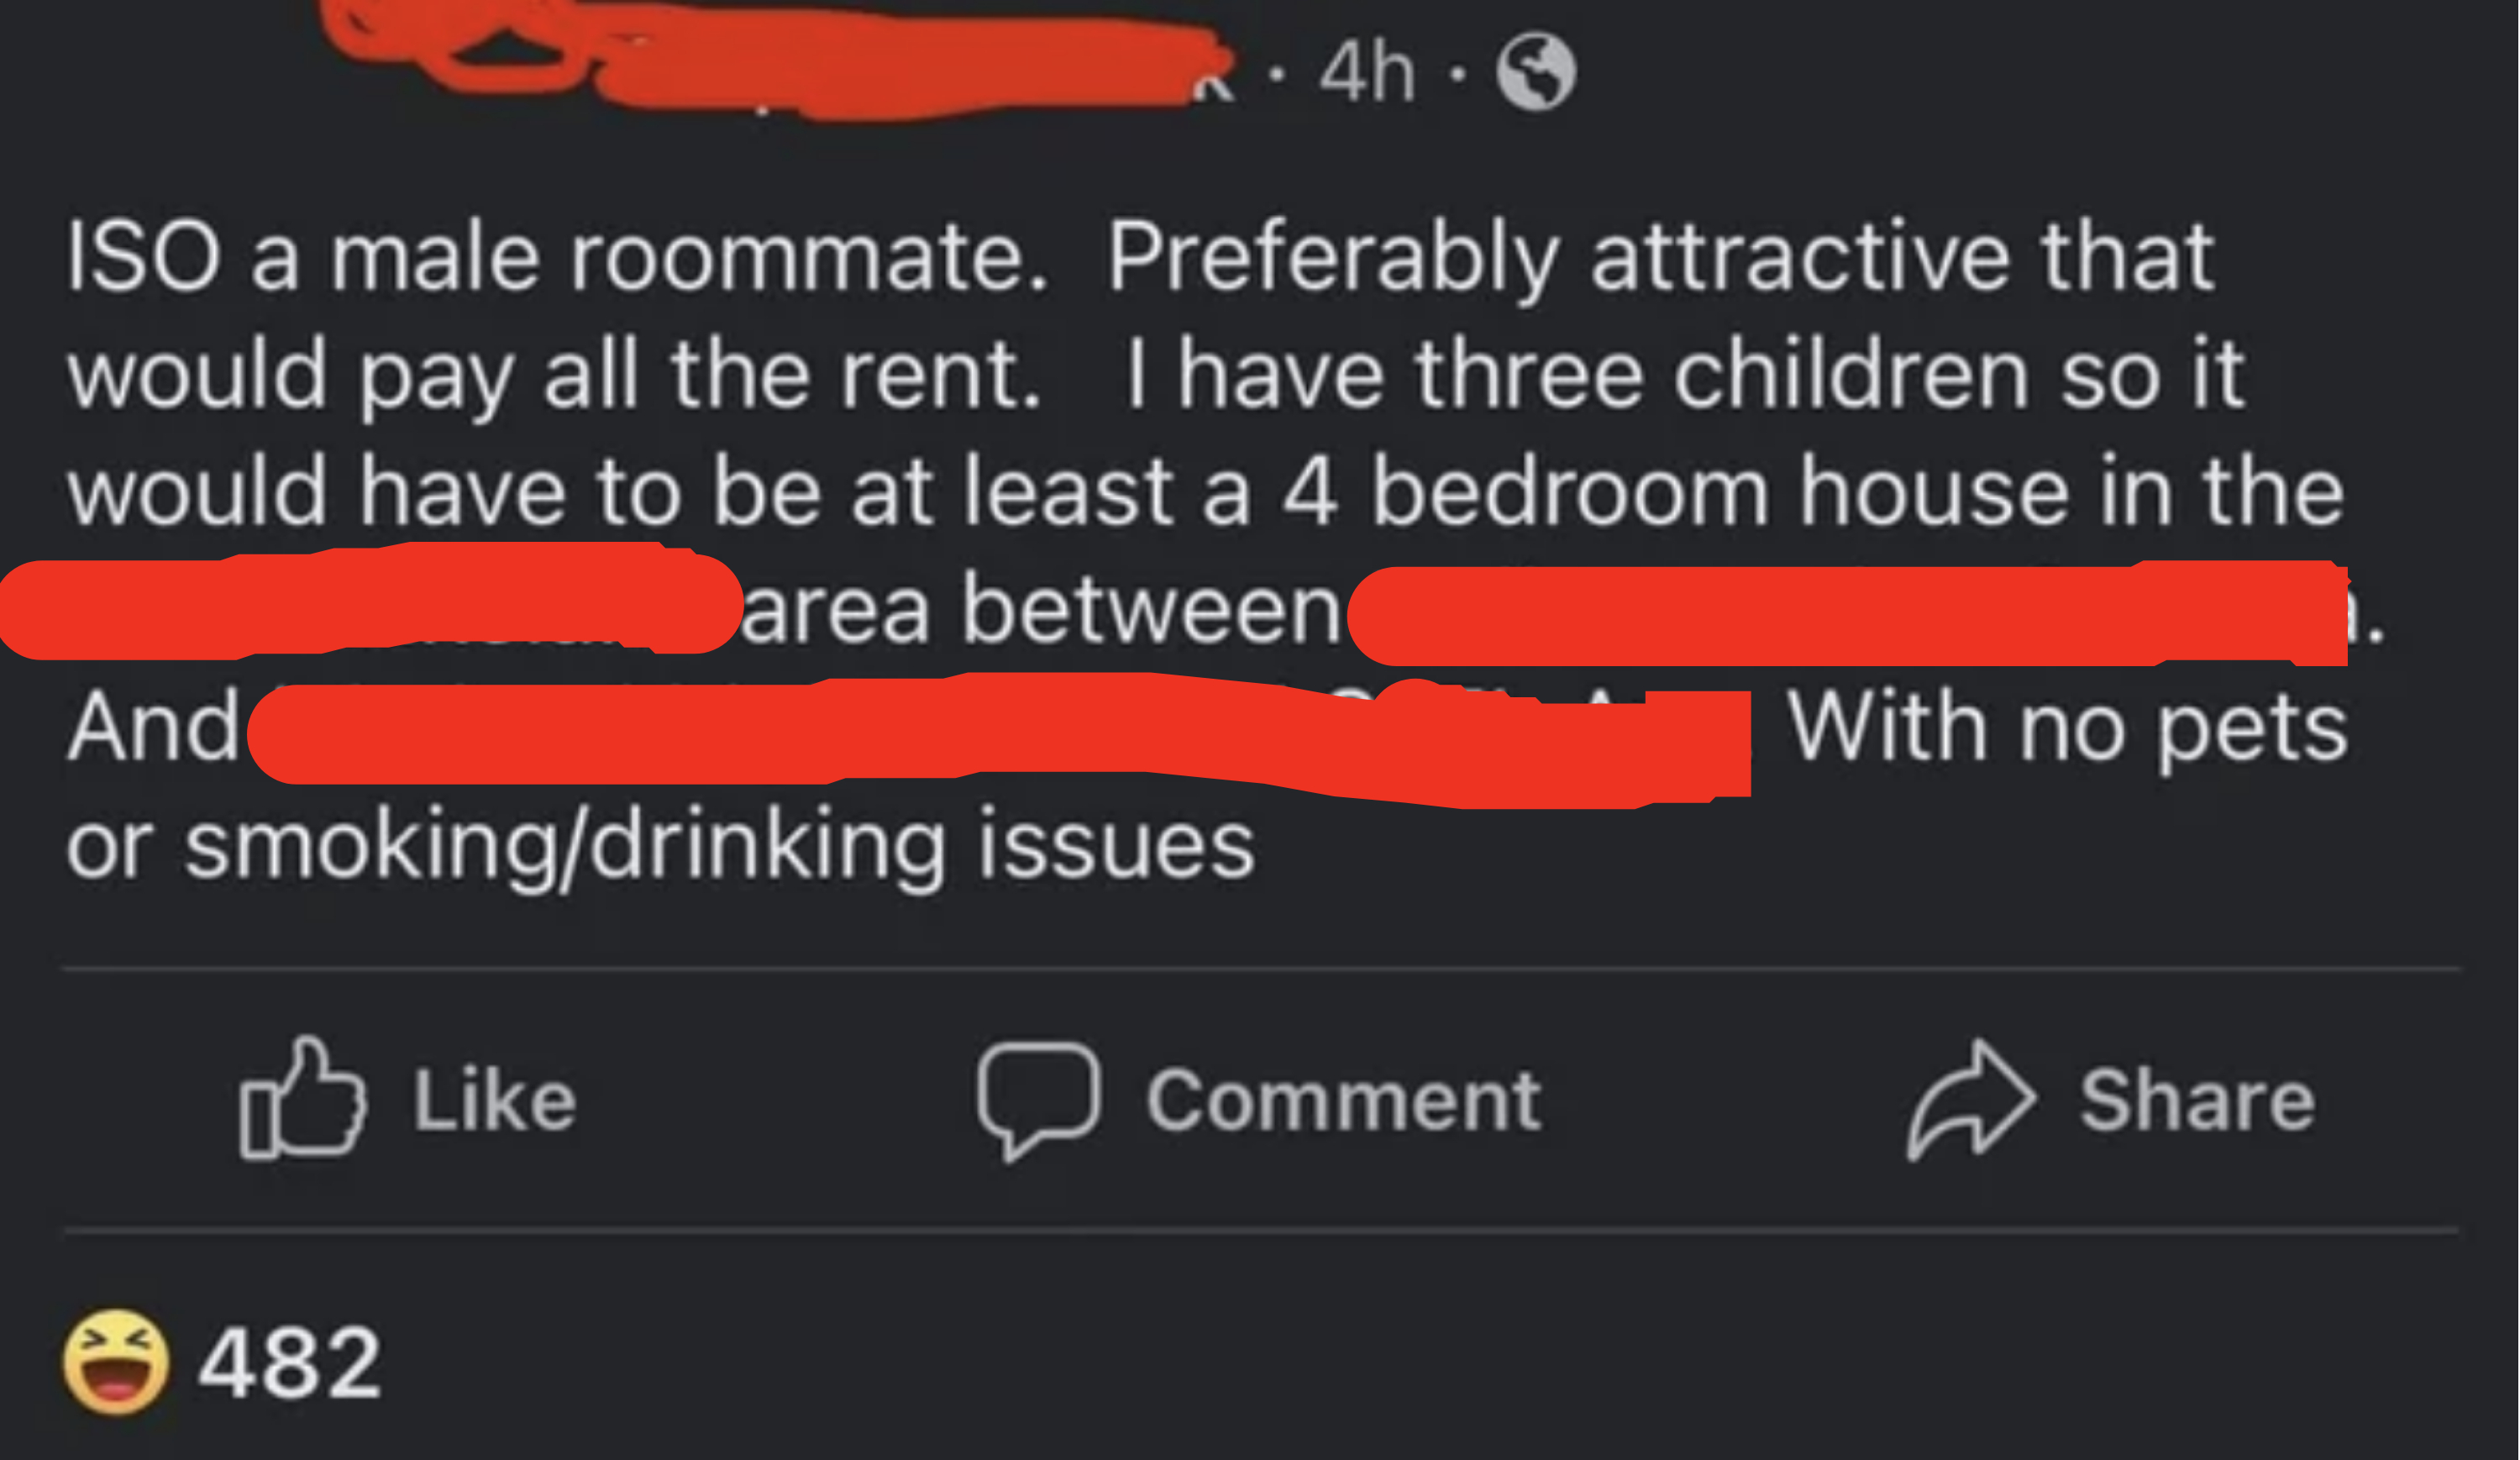 &quot;ISO a male roommate, preferably attractive that would pay all the rent; I have three children so it would have to be at least a 4 BR house&quot; and &quot;no pets or smoking/drinking issues&quot;